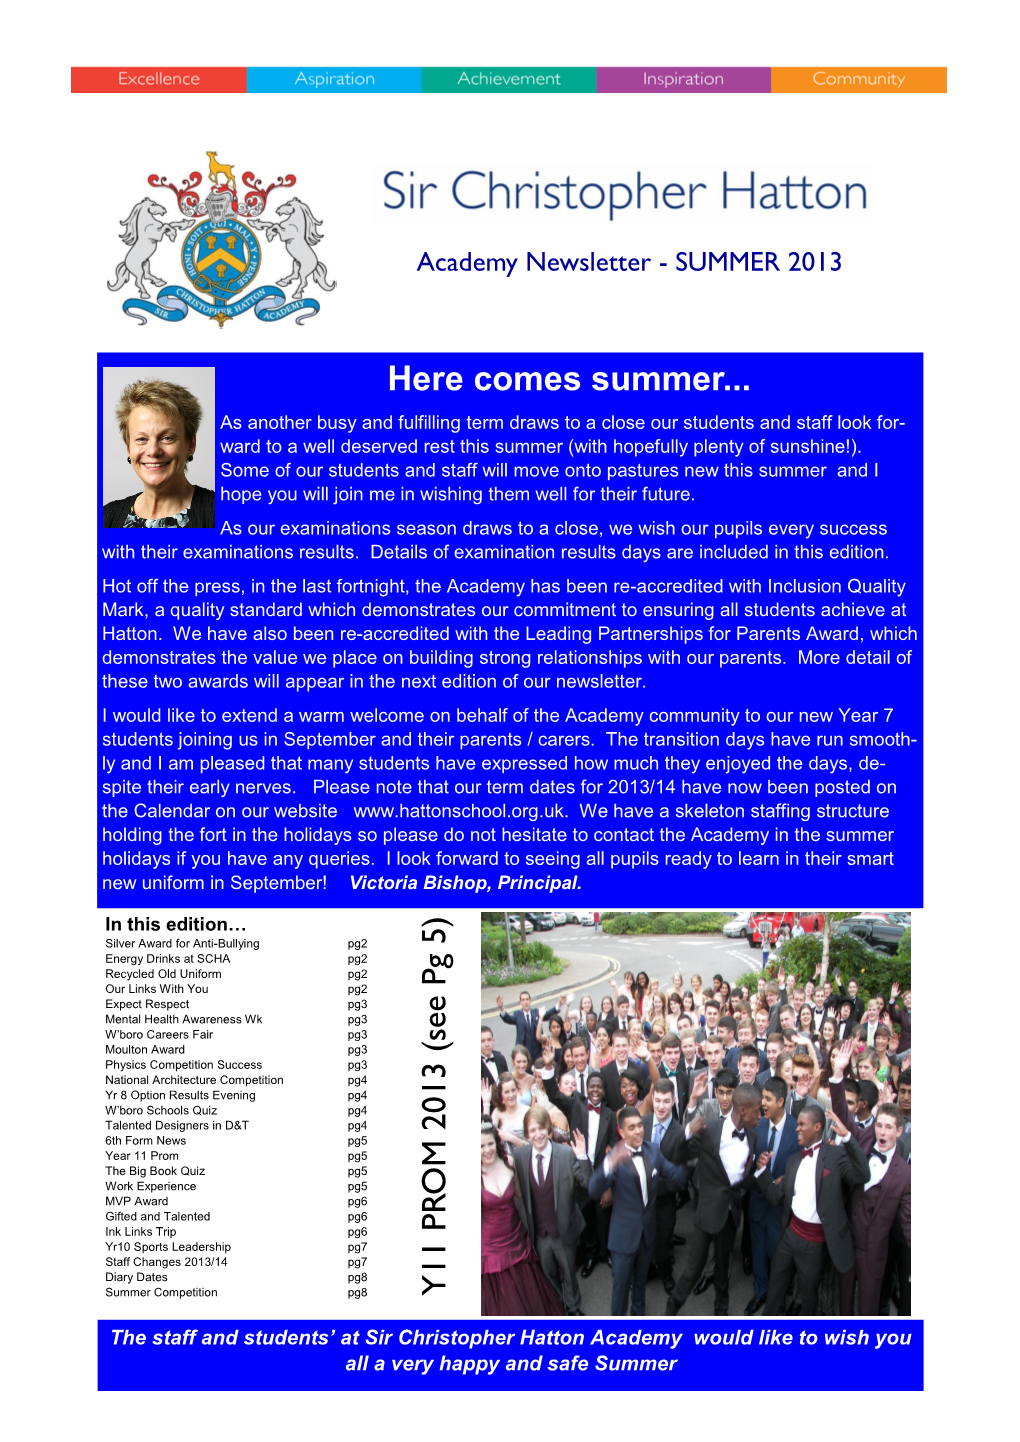 Here Comes Summer... Y11 PROM 2013 (See Pg 5)